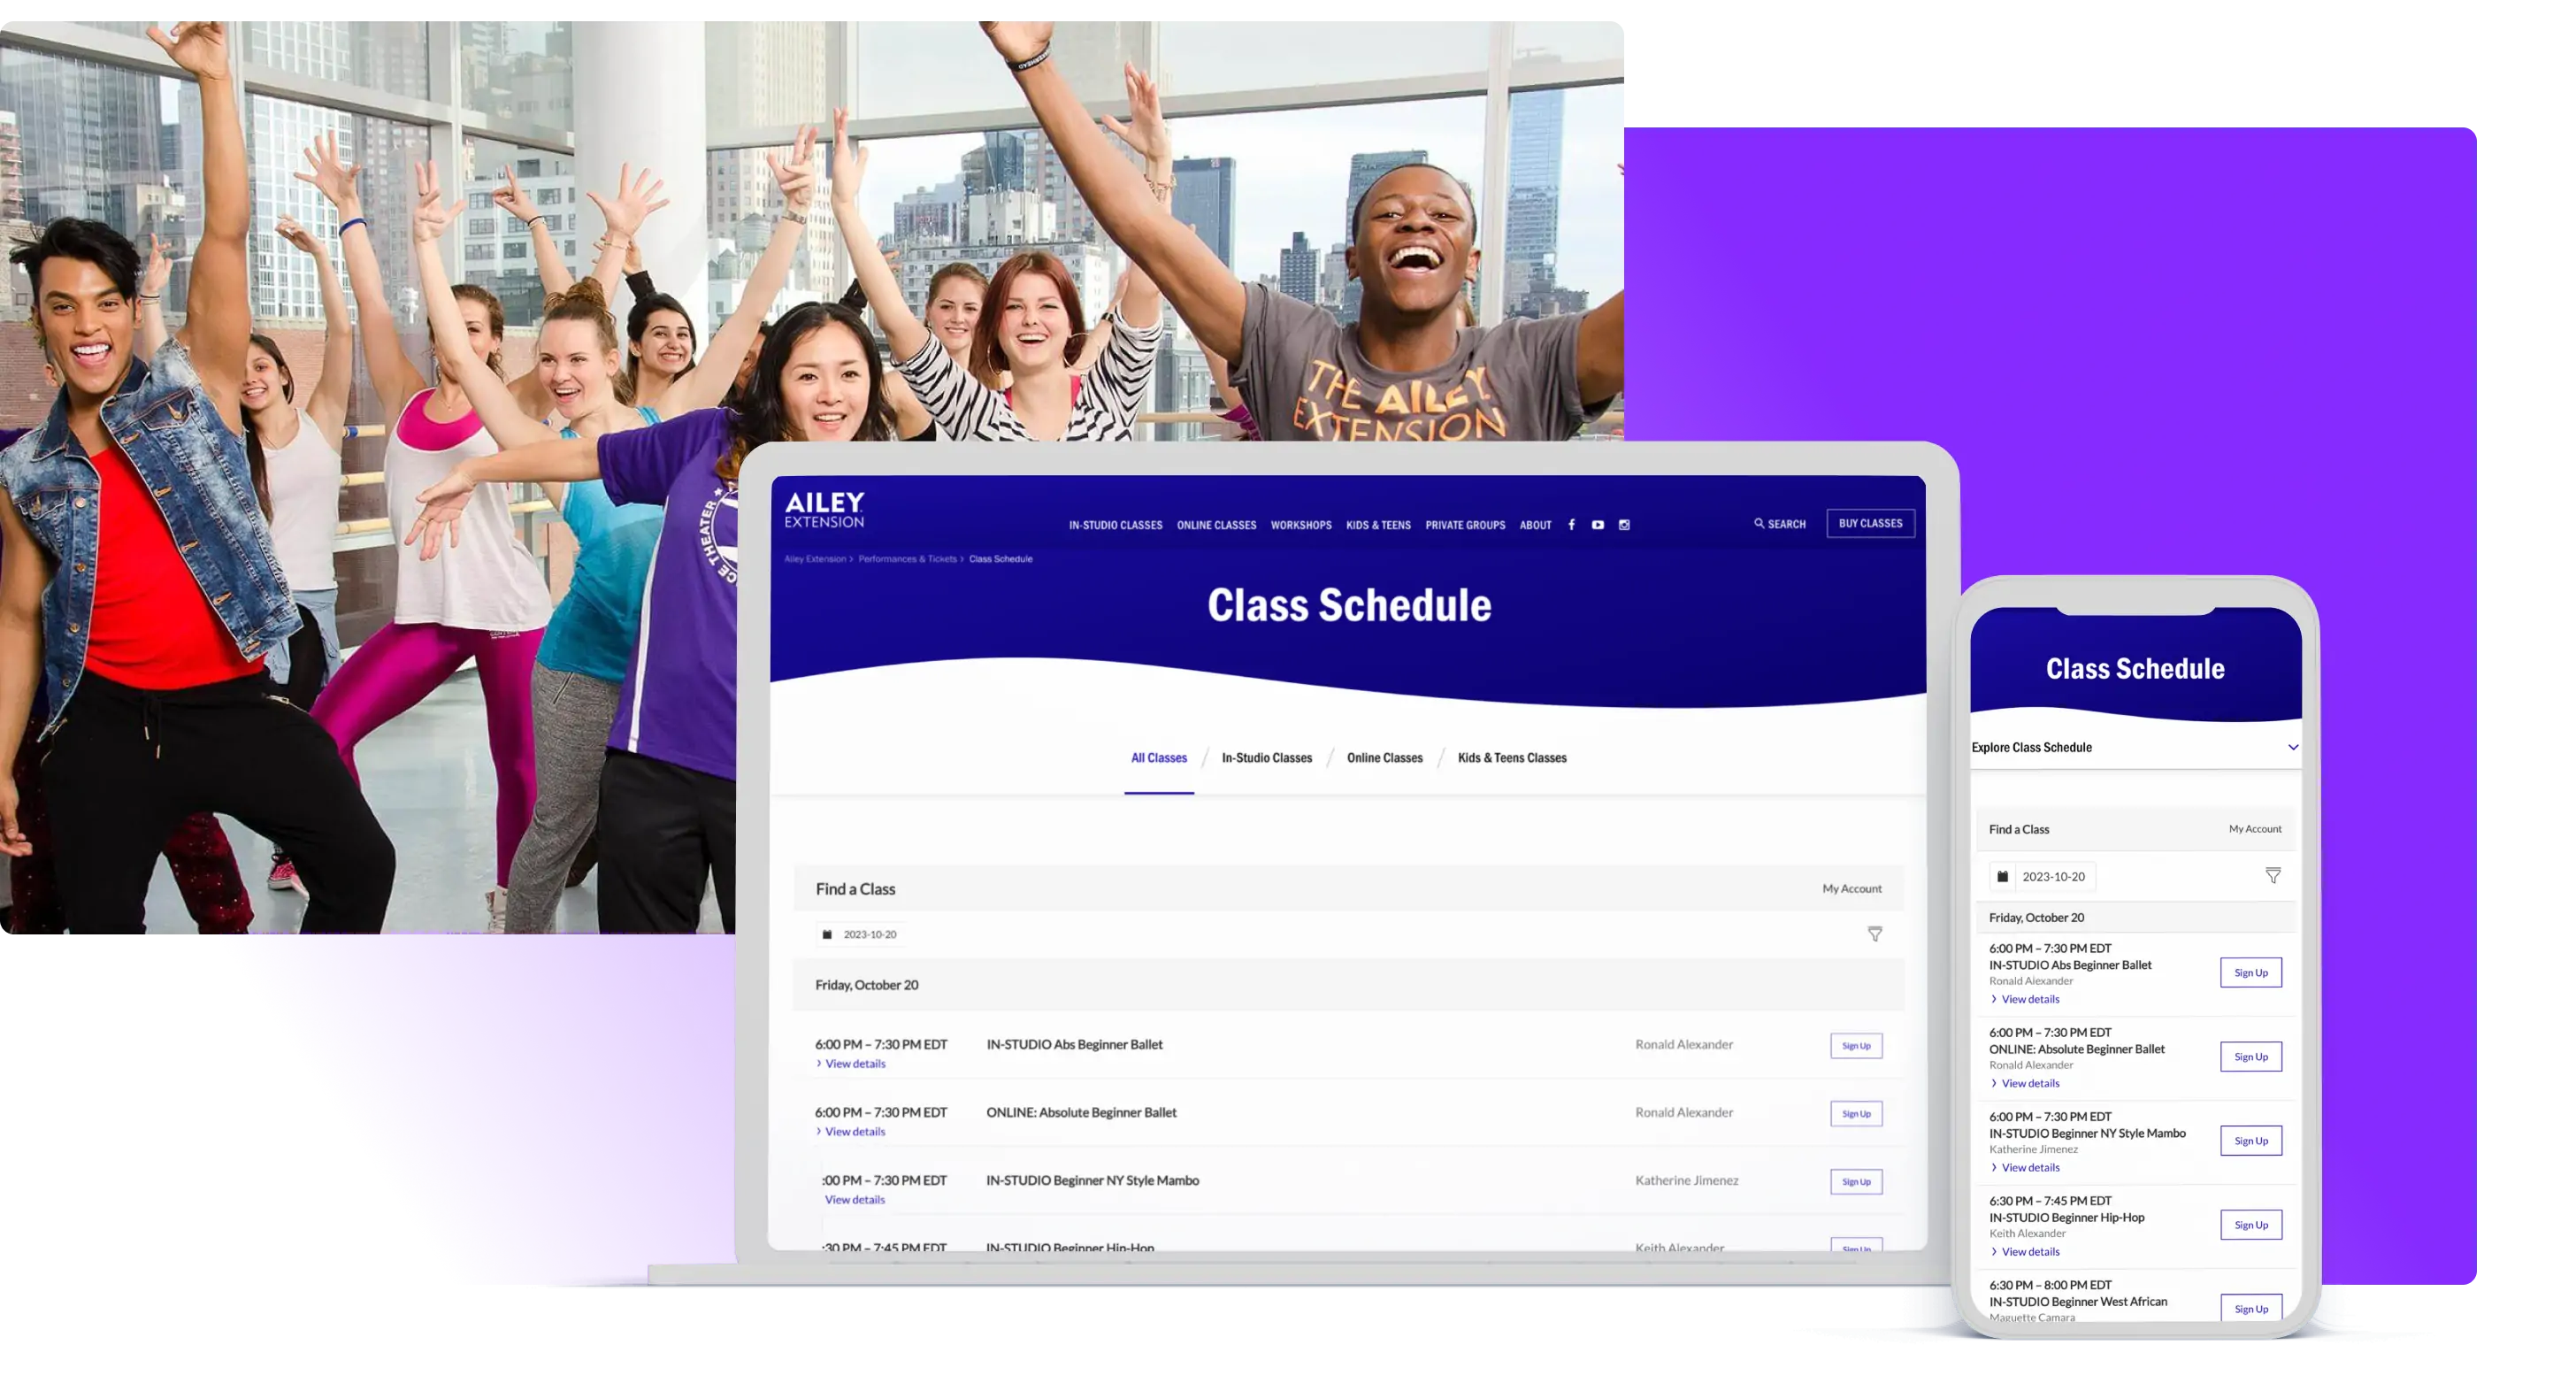 Class Schedule landing page design as seen on desktop and mobile devices